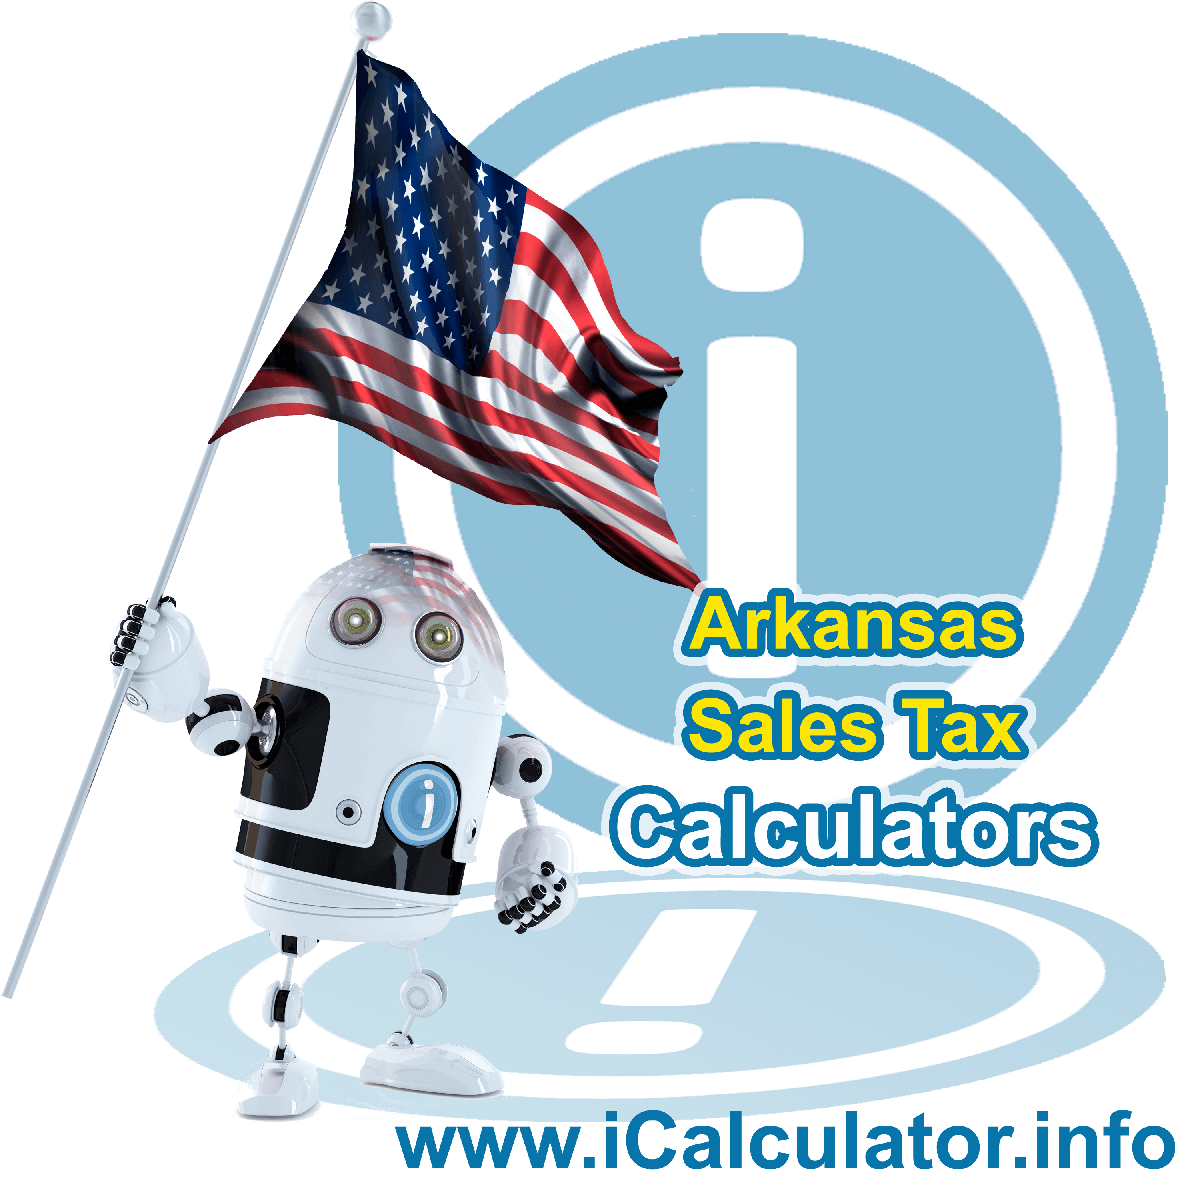 Oxford Sales Rates: This image illustrates a calculator robot calculating Oxford sales tax manually using the Oxford Sales Tax Formula. You can use this information to calculate Oxford Sales Tax manually or use the Oxford Sales Tax Calculator to calculate sales tax online.